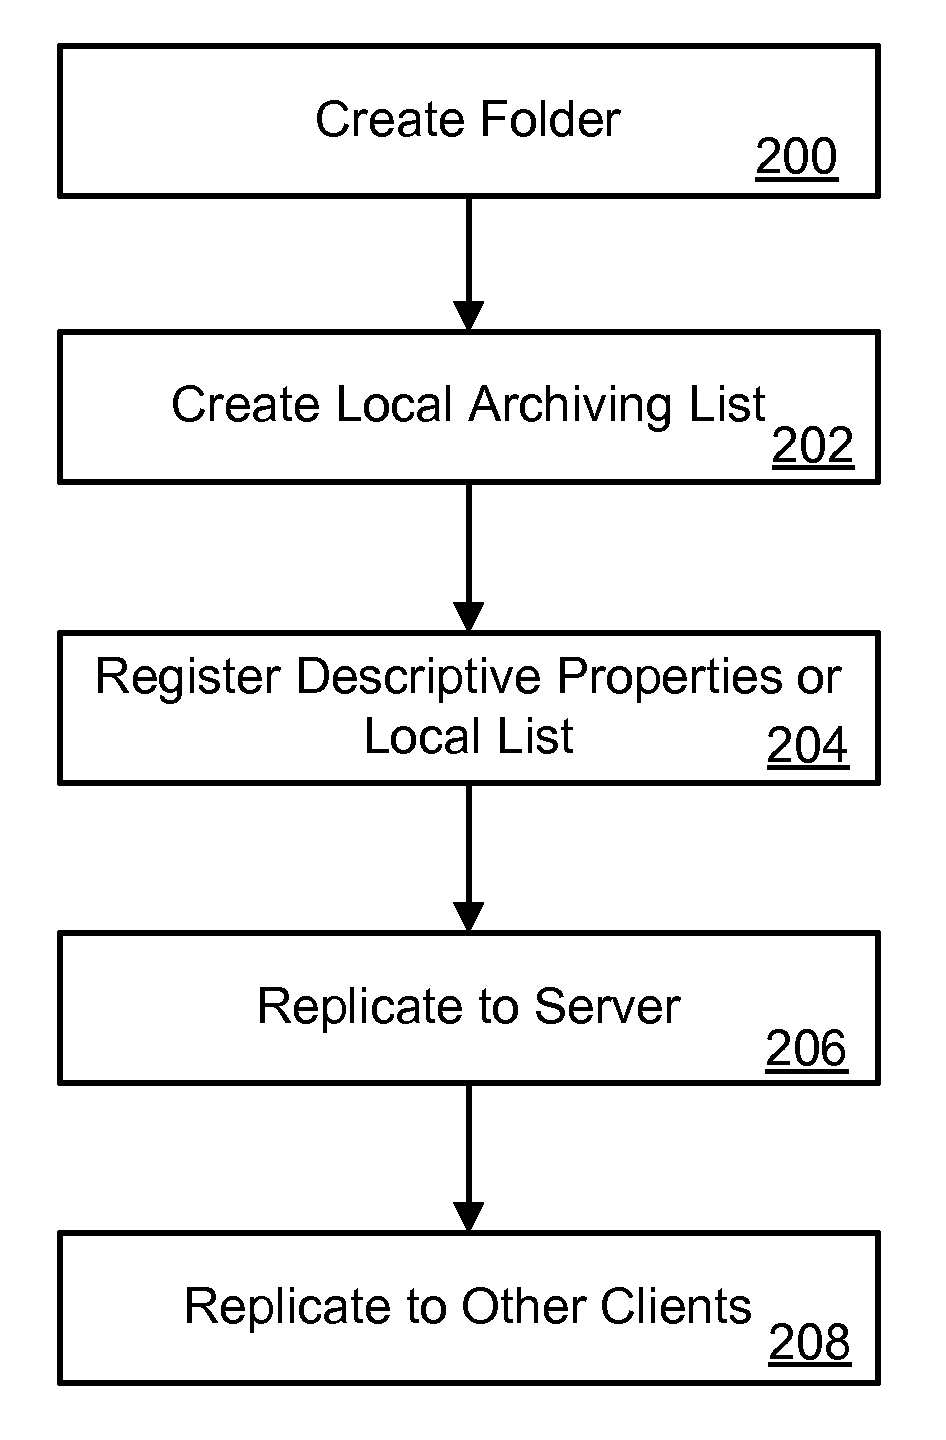 Archiving tool for managing electronic data